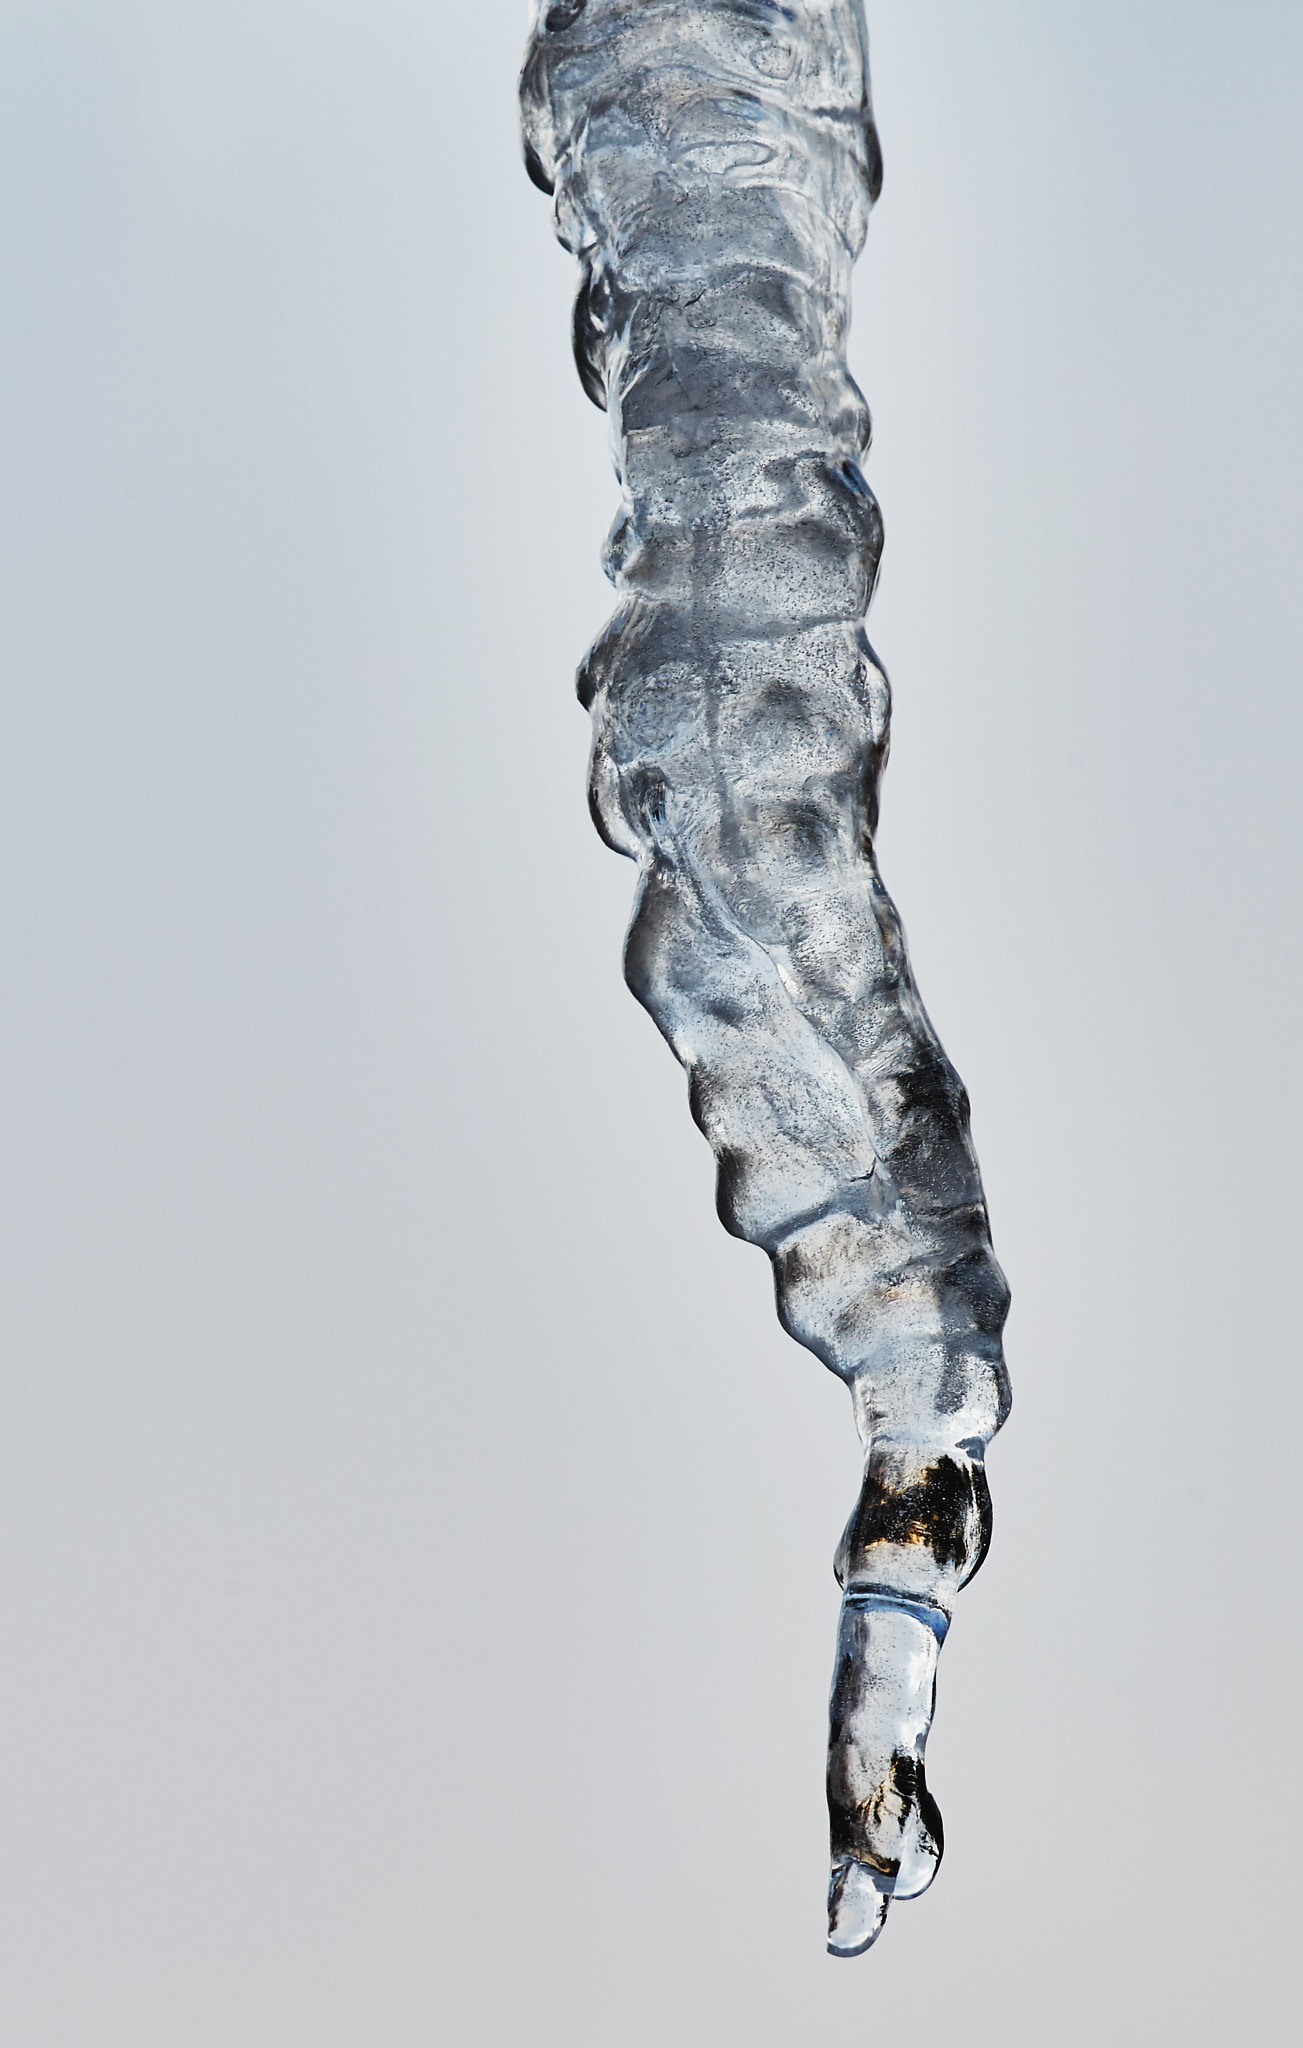 Sony a7 + Tamron SP AF 90mm F2.8 Di Macro sample photo. Large icicle in december2 photography